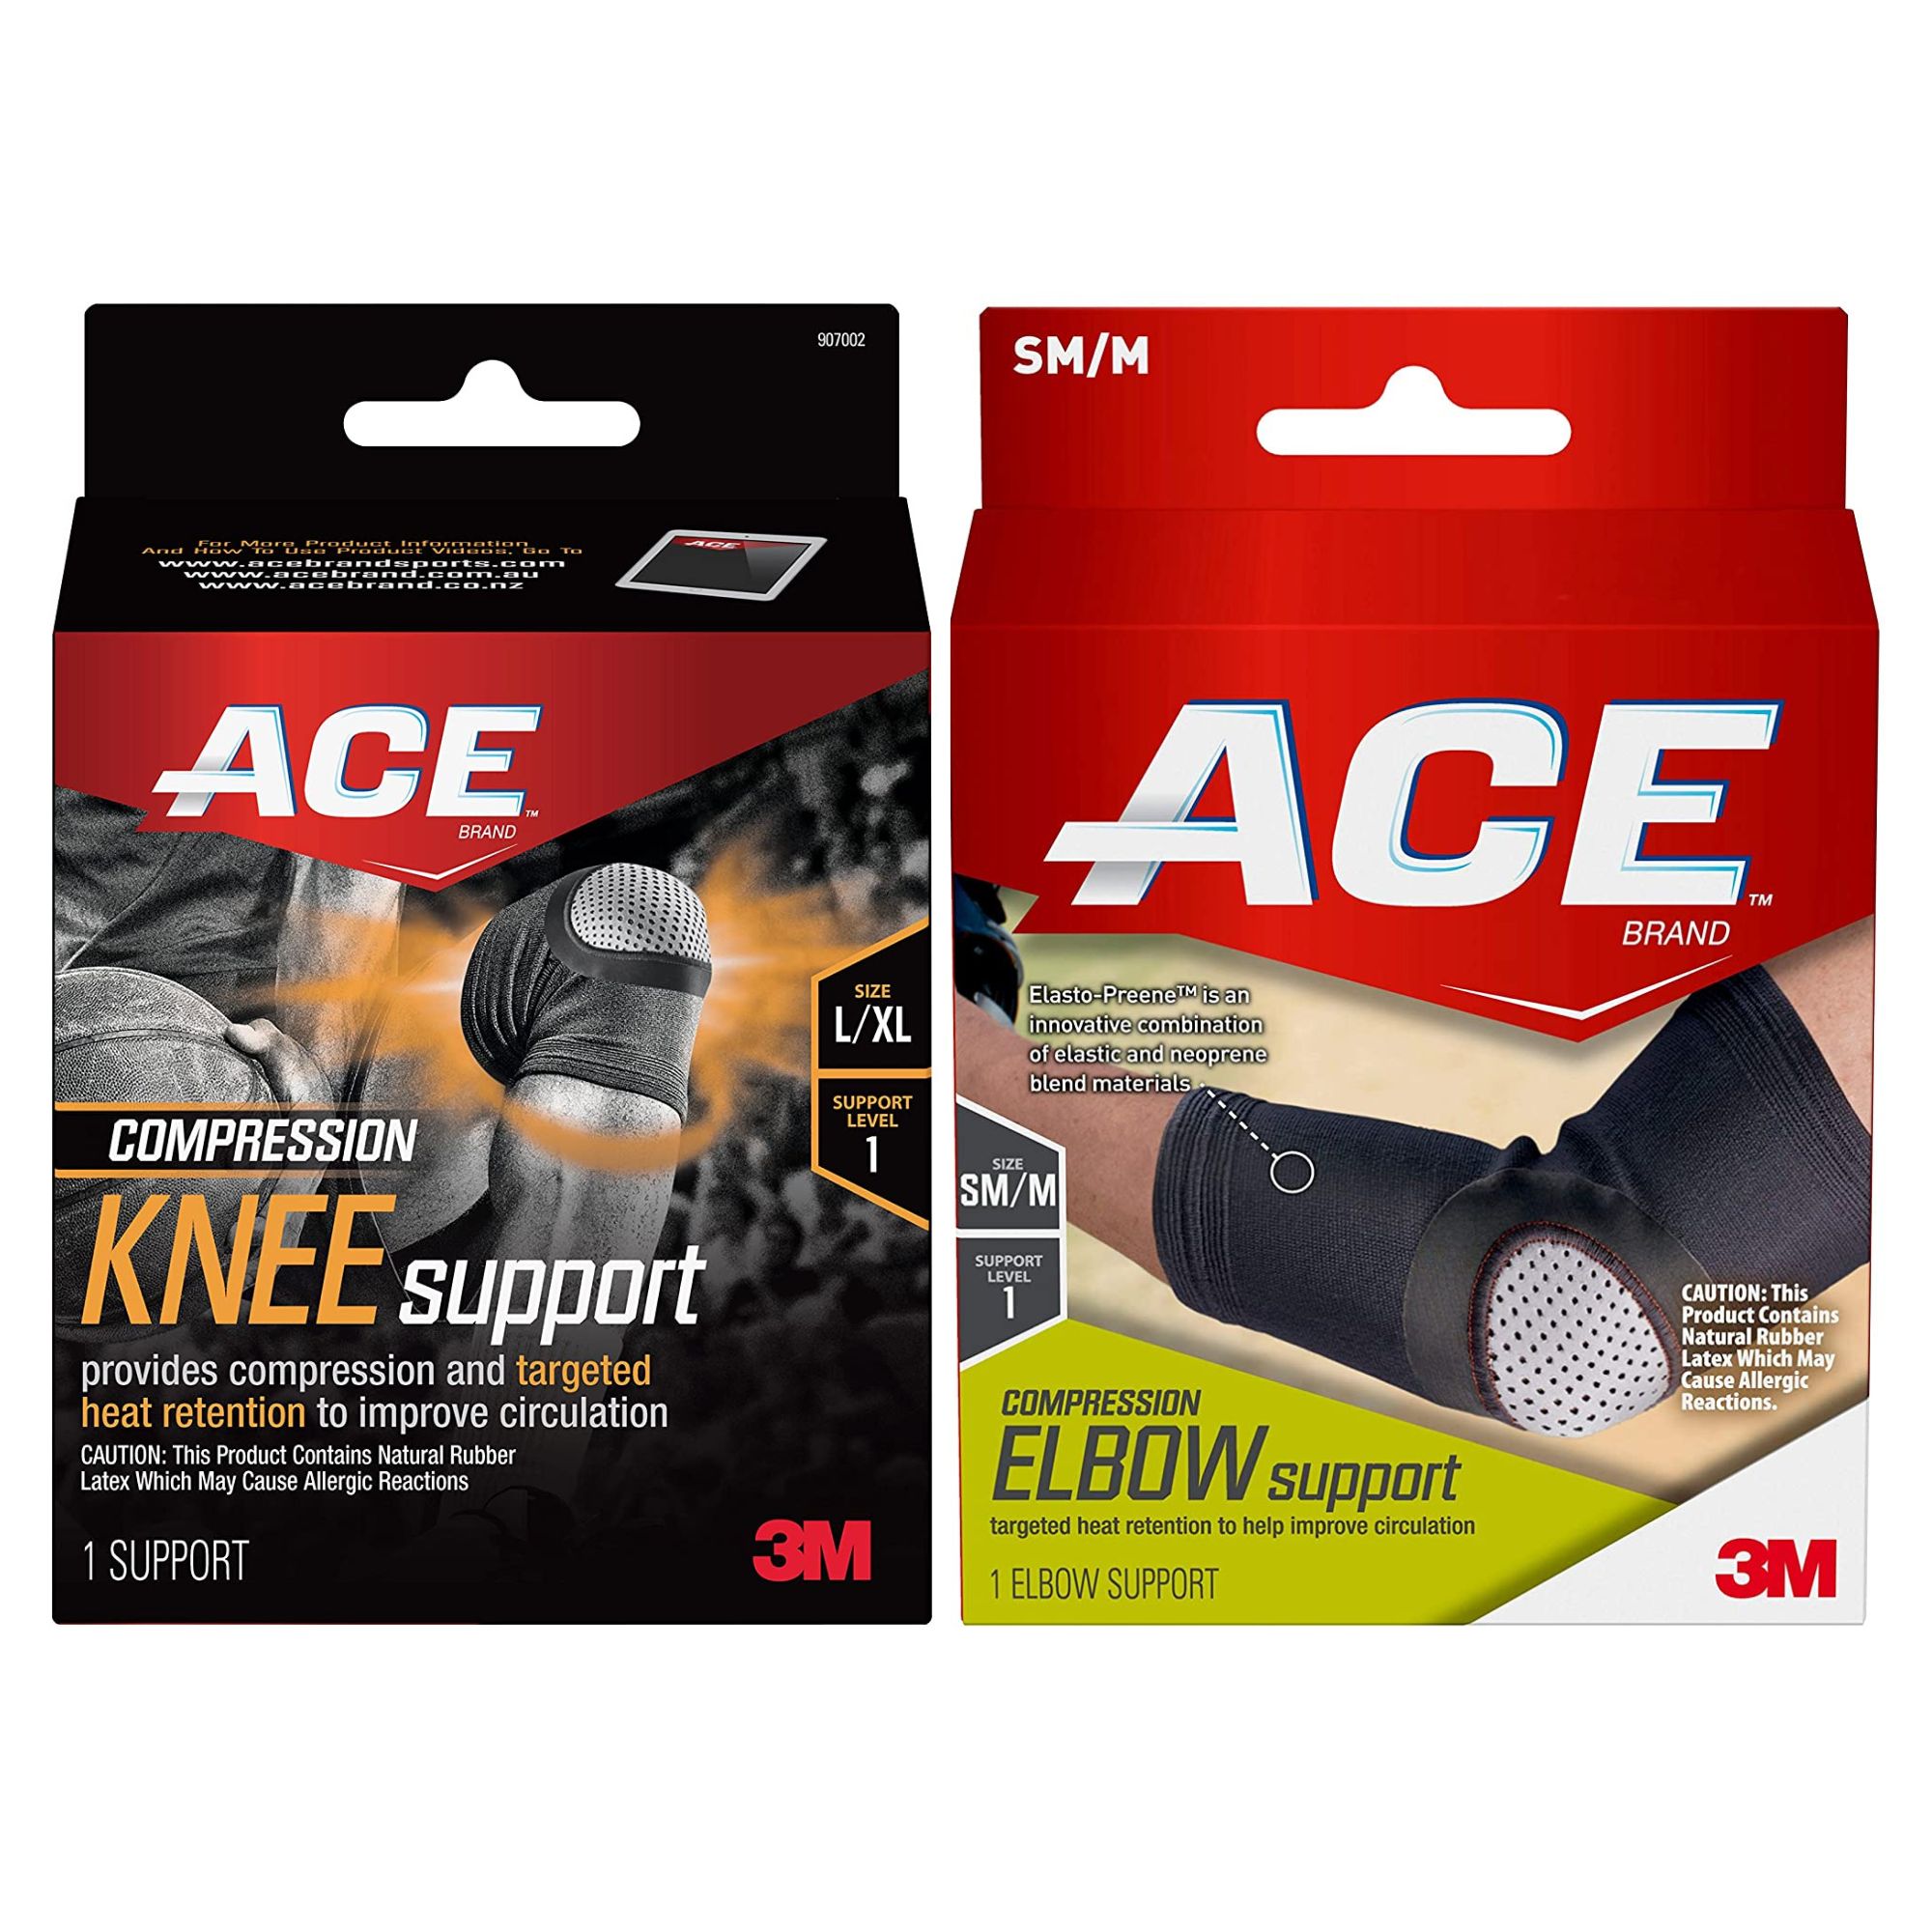 3M A-CS ACE Brand Knee &amp; Elbow Compression Support